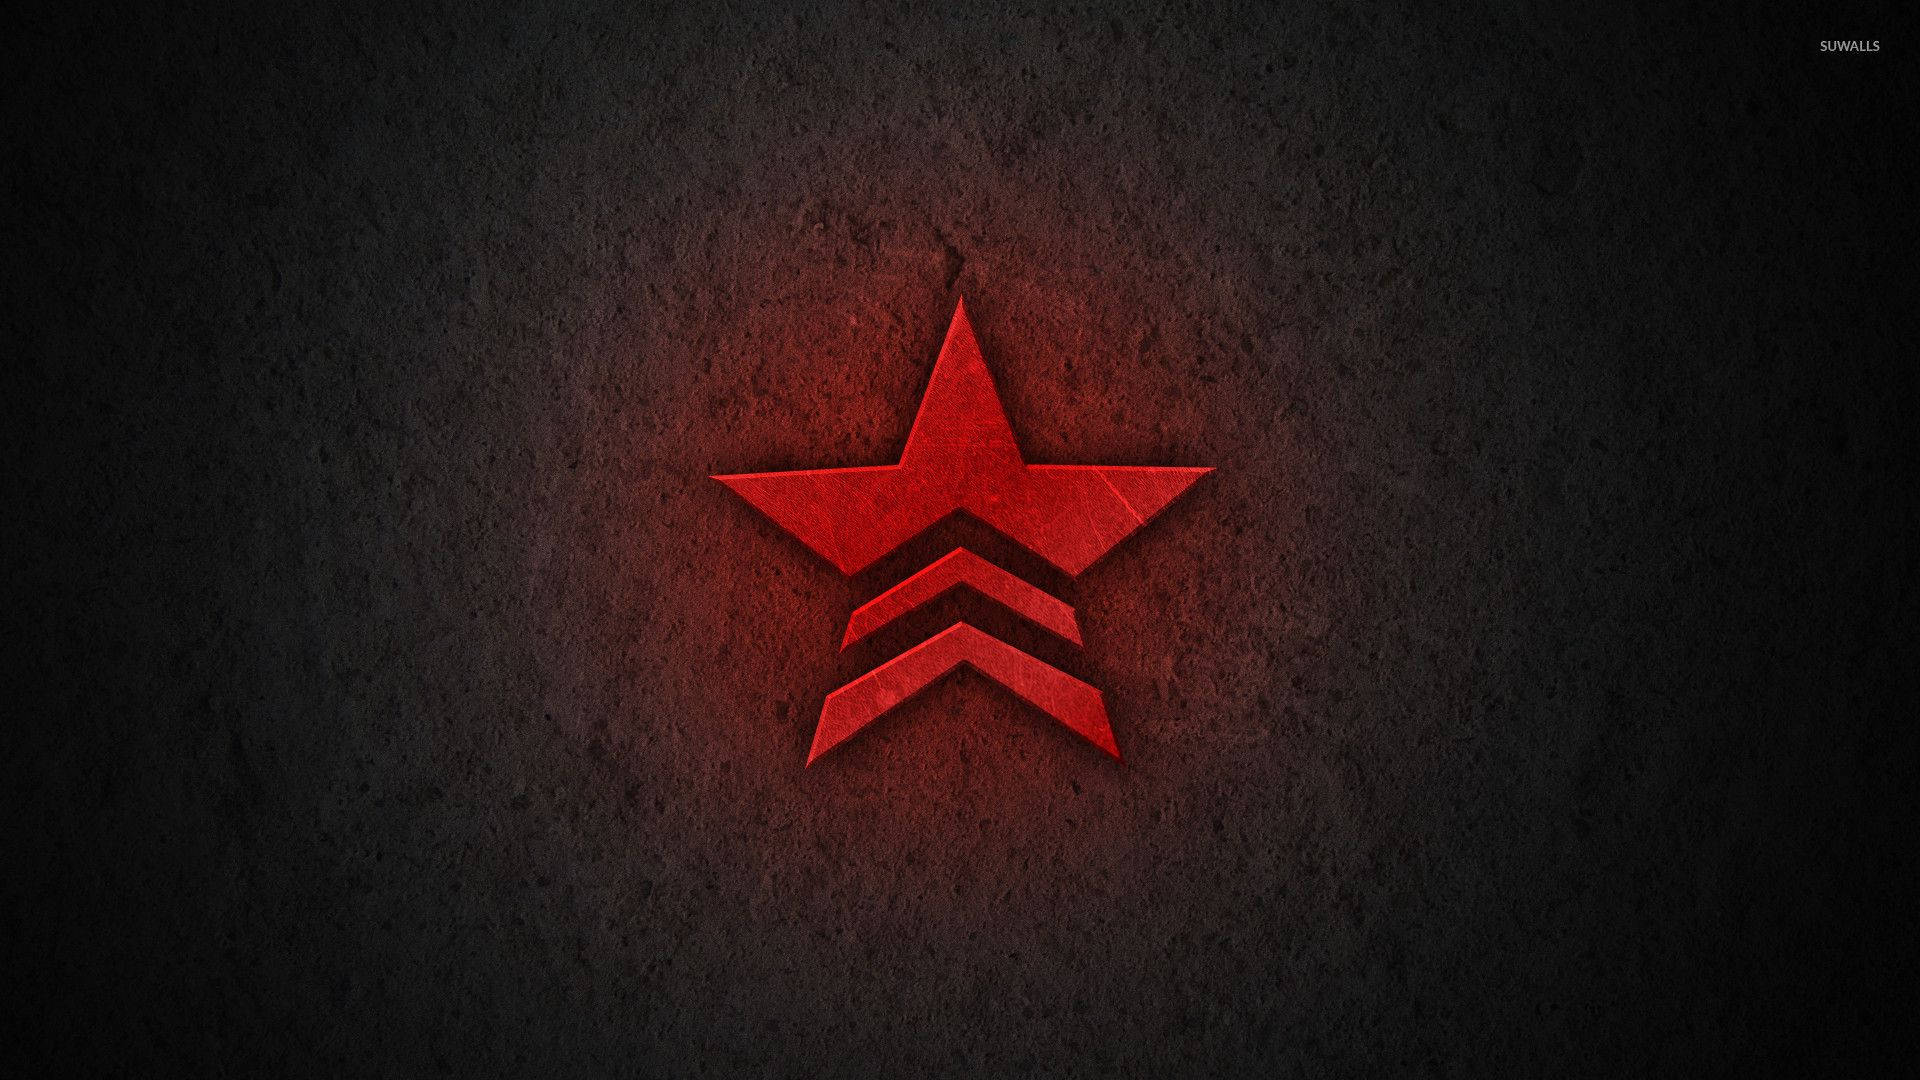 Free Red Star Wallpaper Downloads, [100+] Red Star Wallpapers for FREE |  